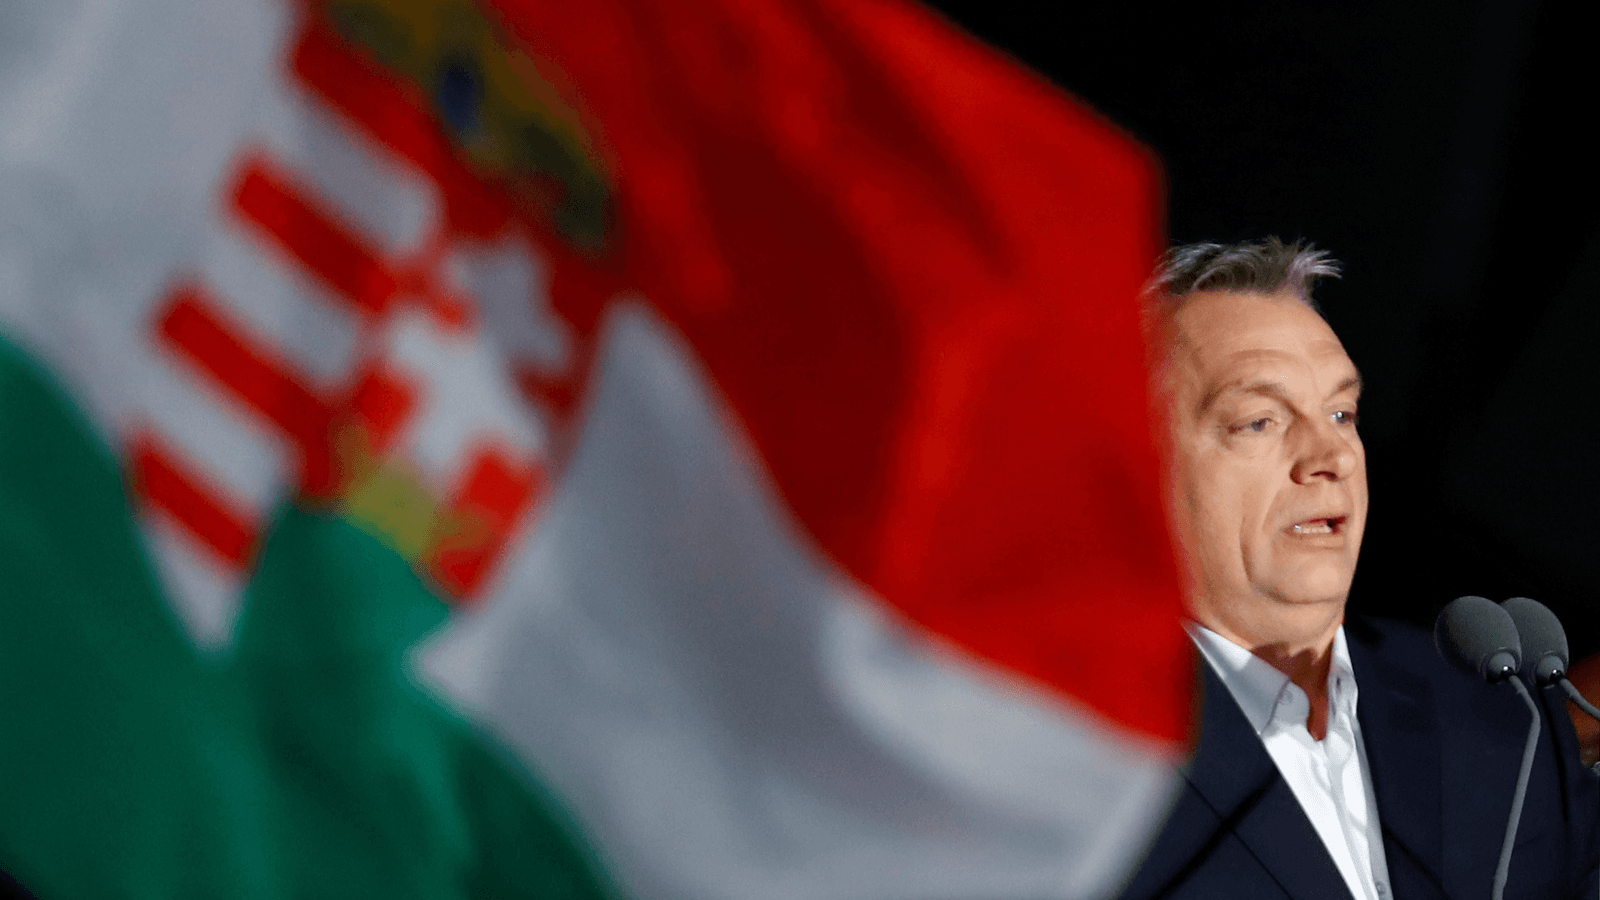 Hungarian Prime Minister Viktor Orban addresses supporters after the announcement of the partial results of parliamentary election in Budapest, Hungary, April 8, 2018. 